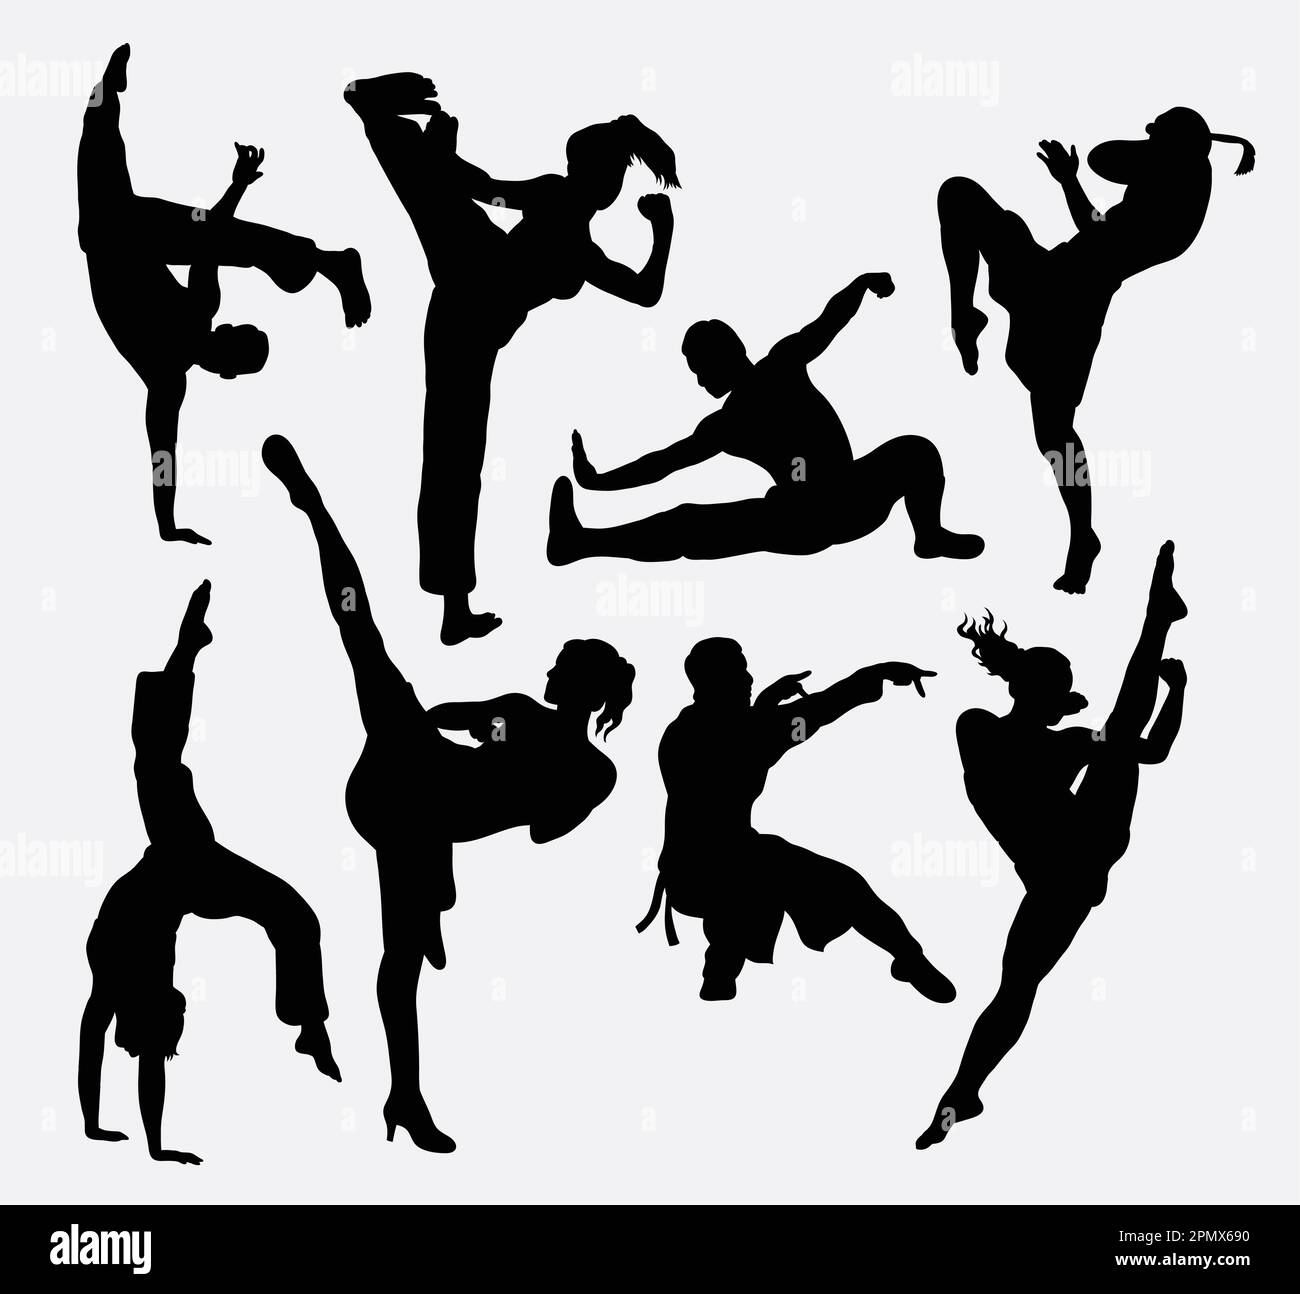 Kungfu martial arts silhouettes Stock Vector